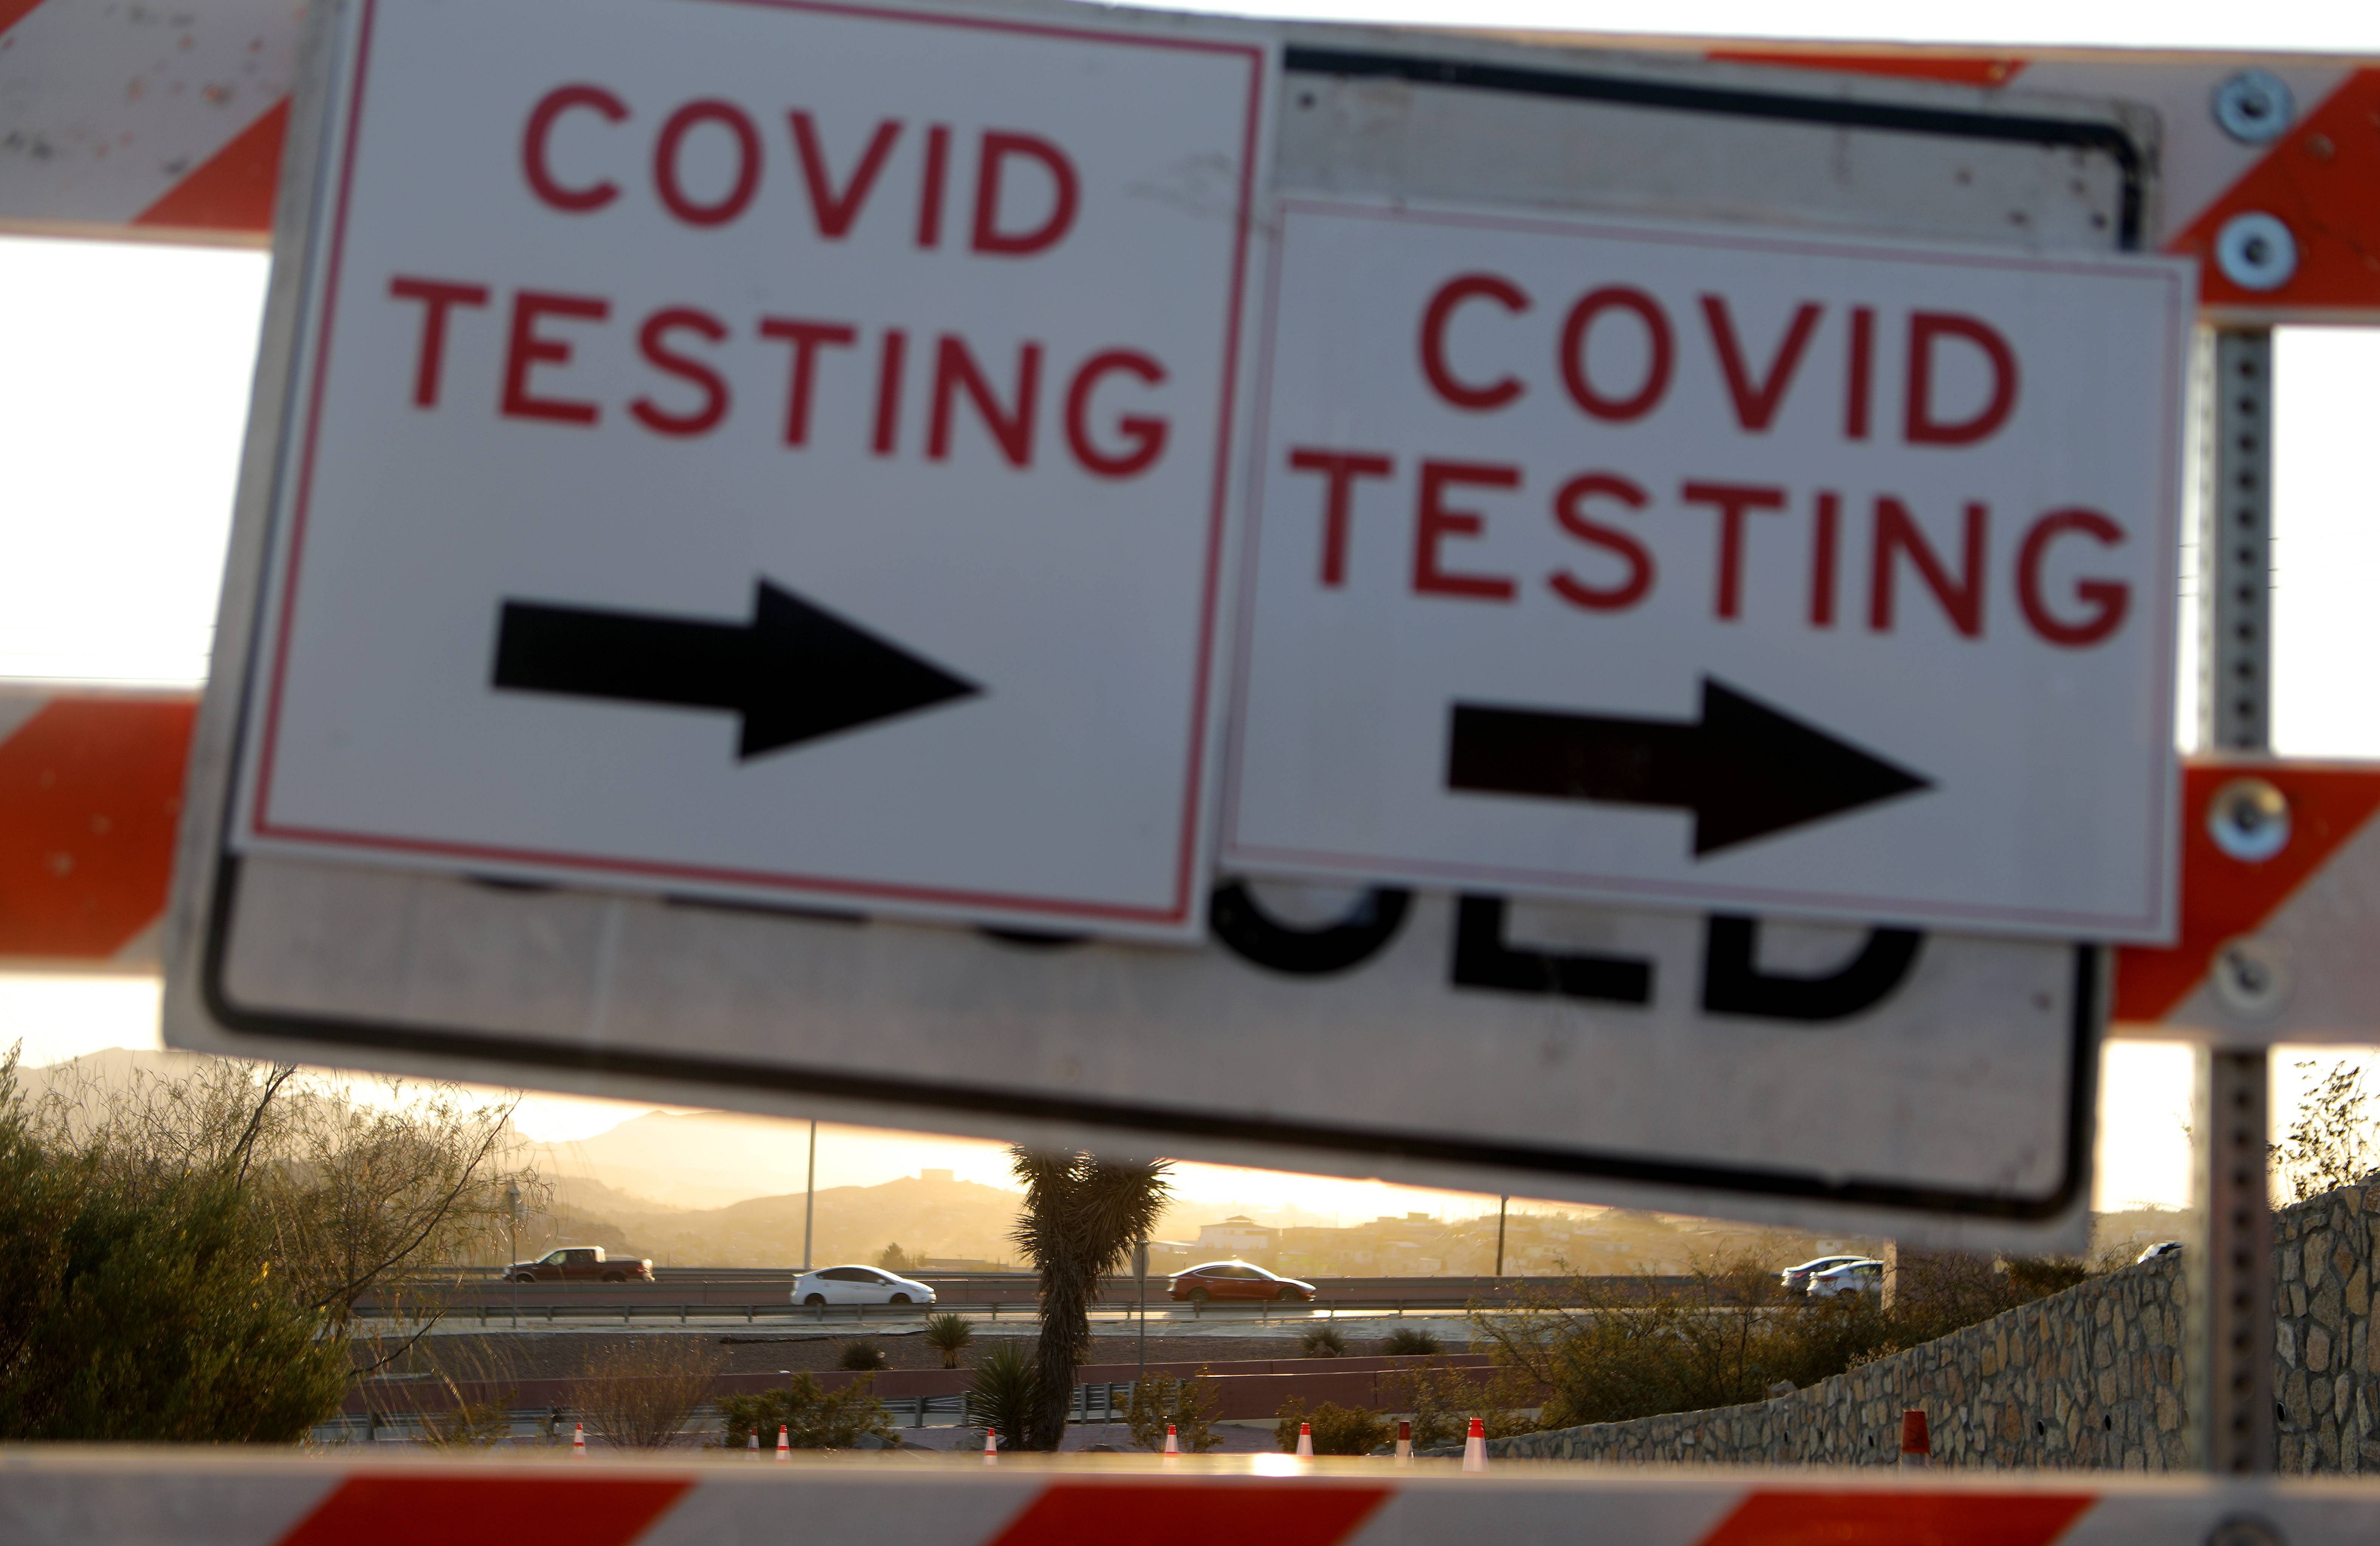 A sign is displayed at a drive-in COVID-19 testing site amid a surge of coronavirus cases in the city on November 18, 2020 in El Paso, Texas. Texas surpassed 20,000 confirmed coronavirus deaths on November 16, the second highest in the U.S., with active cases in El Paso now over 34,000 and confirmed COVID-19 deaths at 804. Credit: Getty Images/AFP